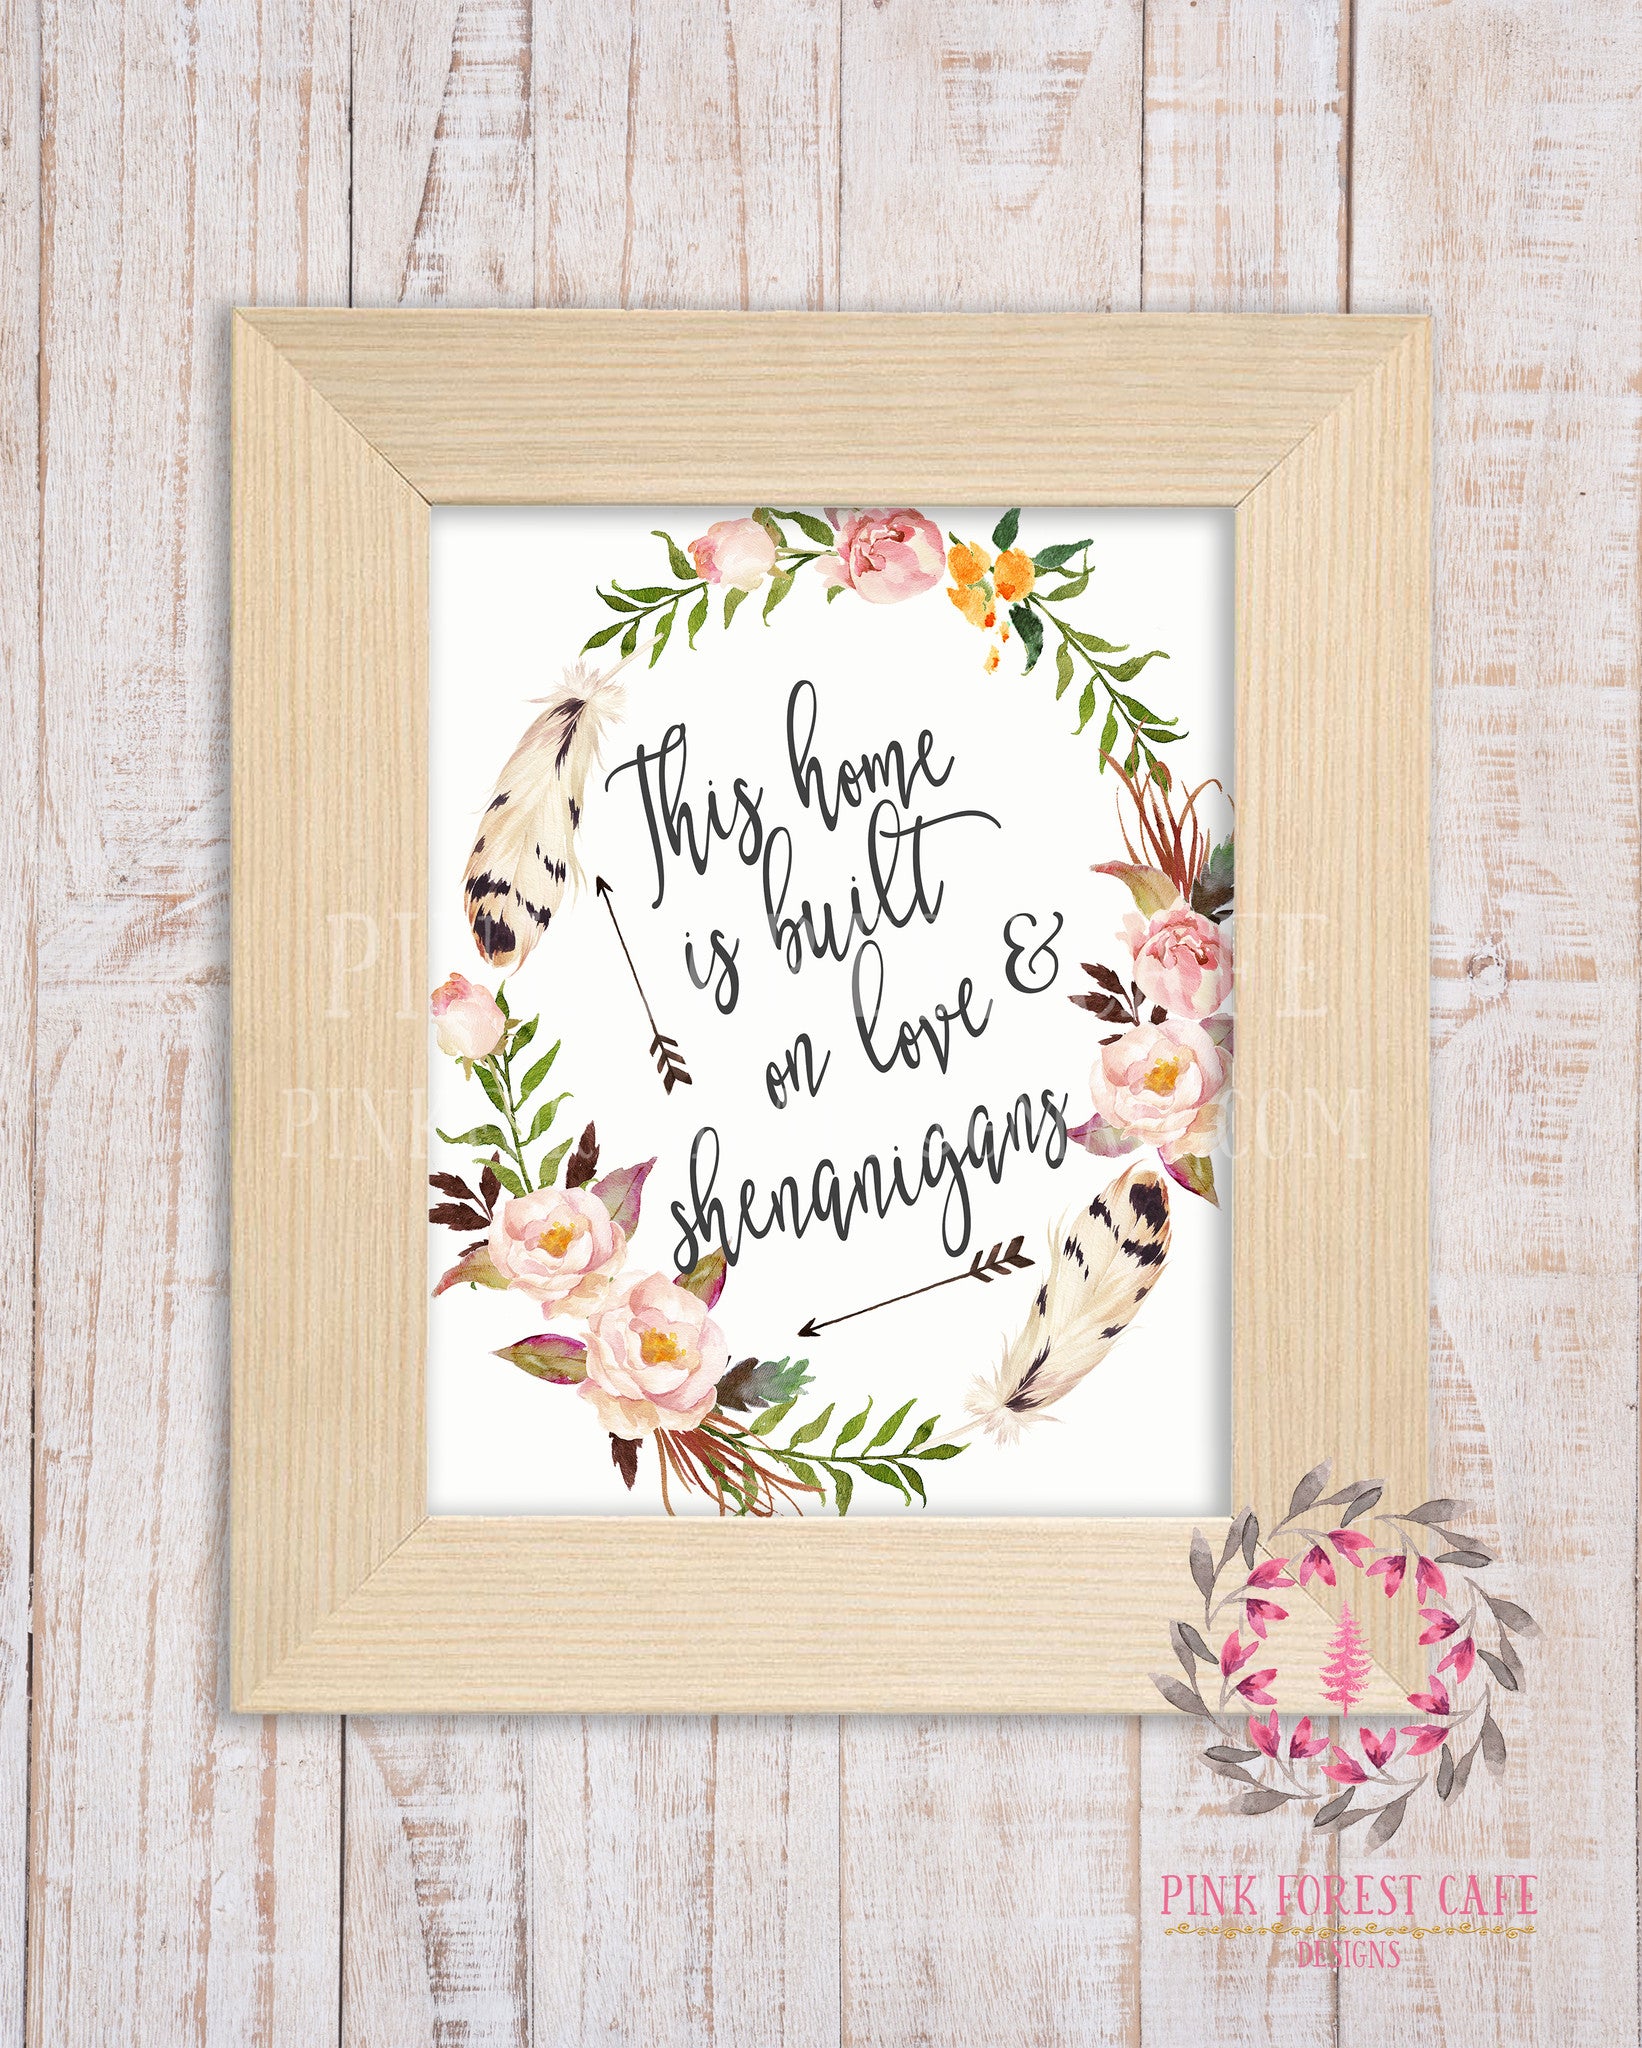 This House Is Built On Love & Shenanigans Boho Watercolor Floral Printable Print Wall Art Home Decor